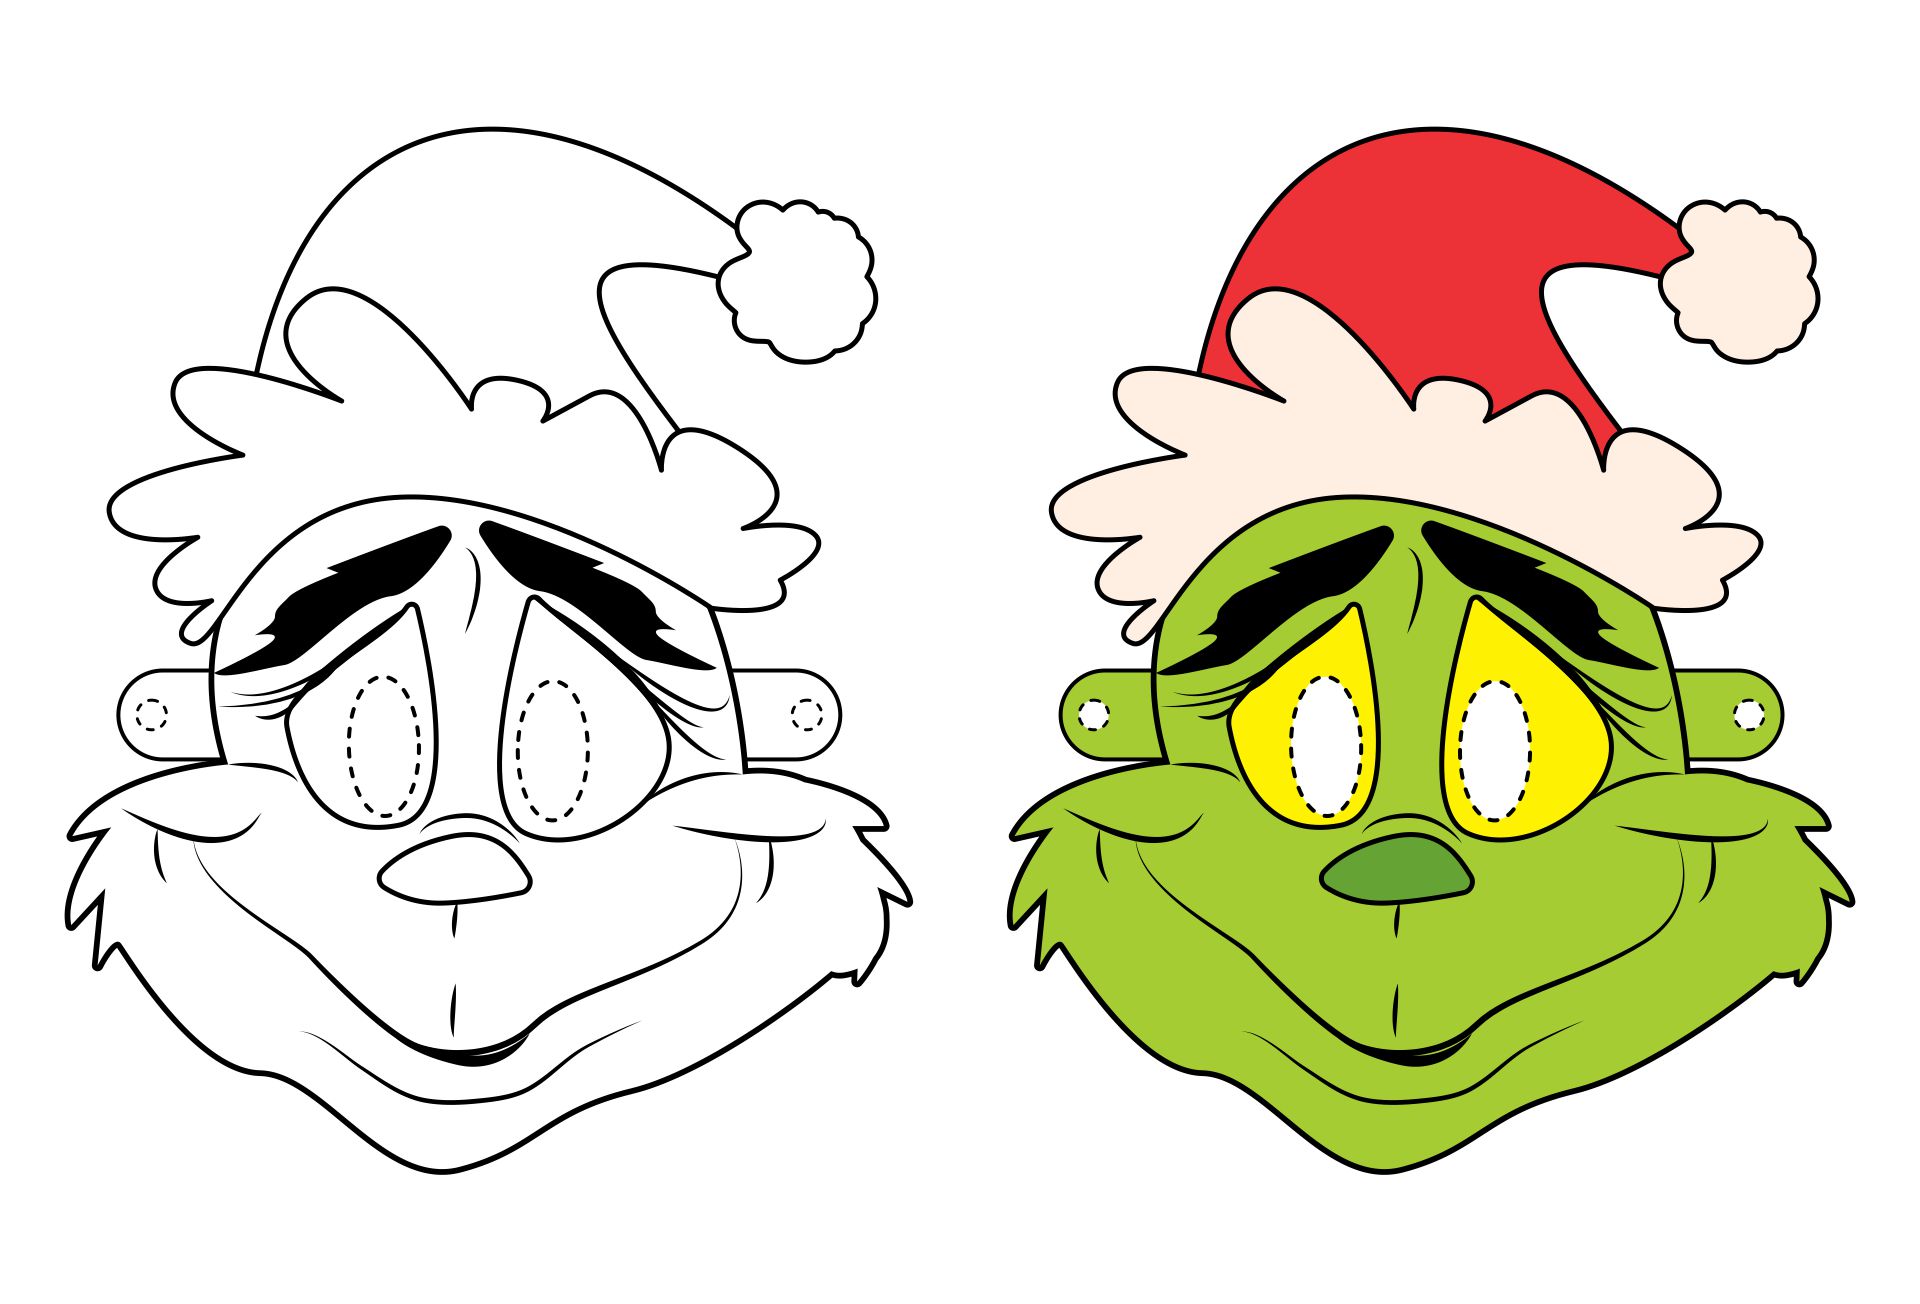 7-best-images-of-printable-grinch-pattern-printable-grinch-face-pattern-how-the-grinch-stole